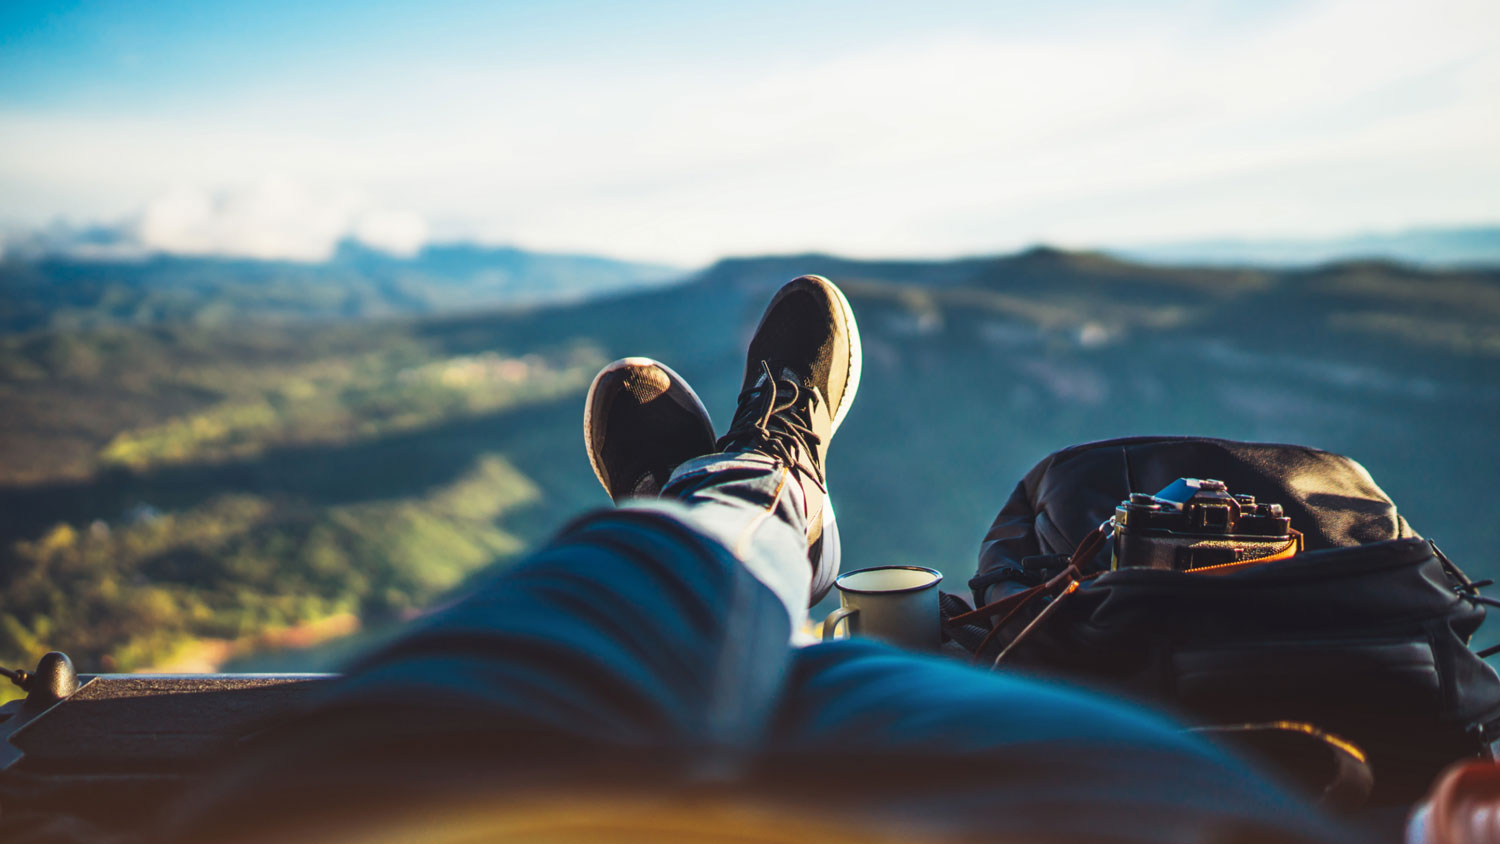 POV photo: legs and hiking boots stretch out in front of a mountainous landscape